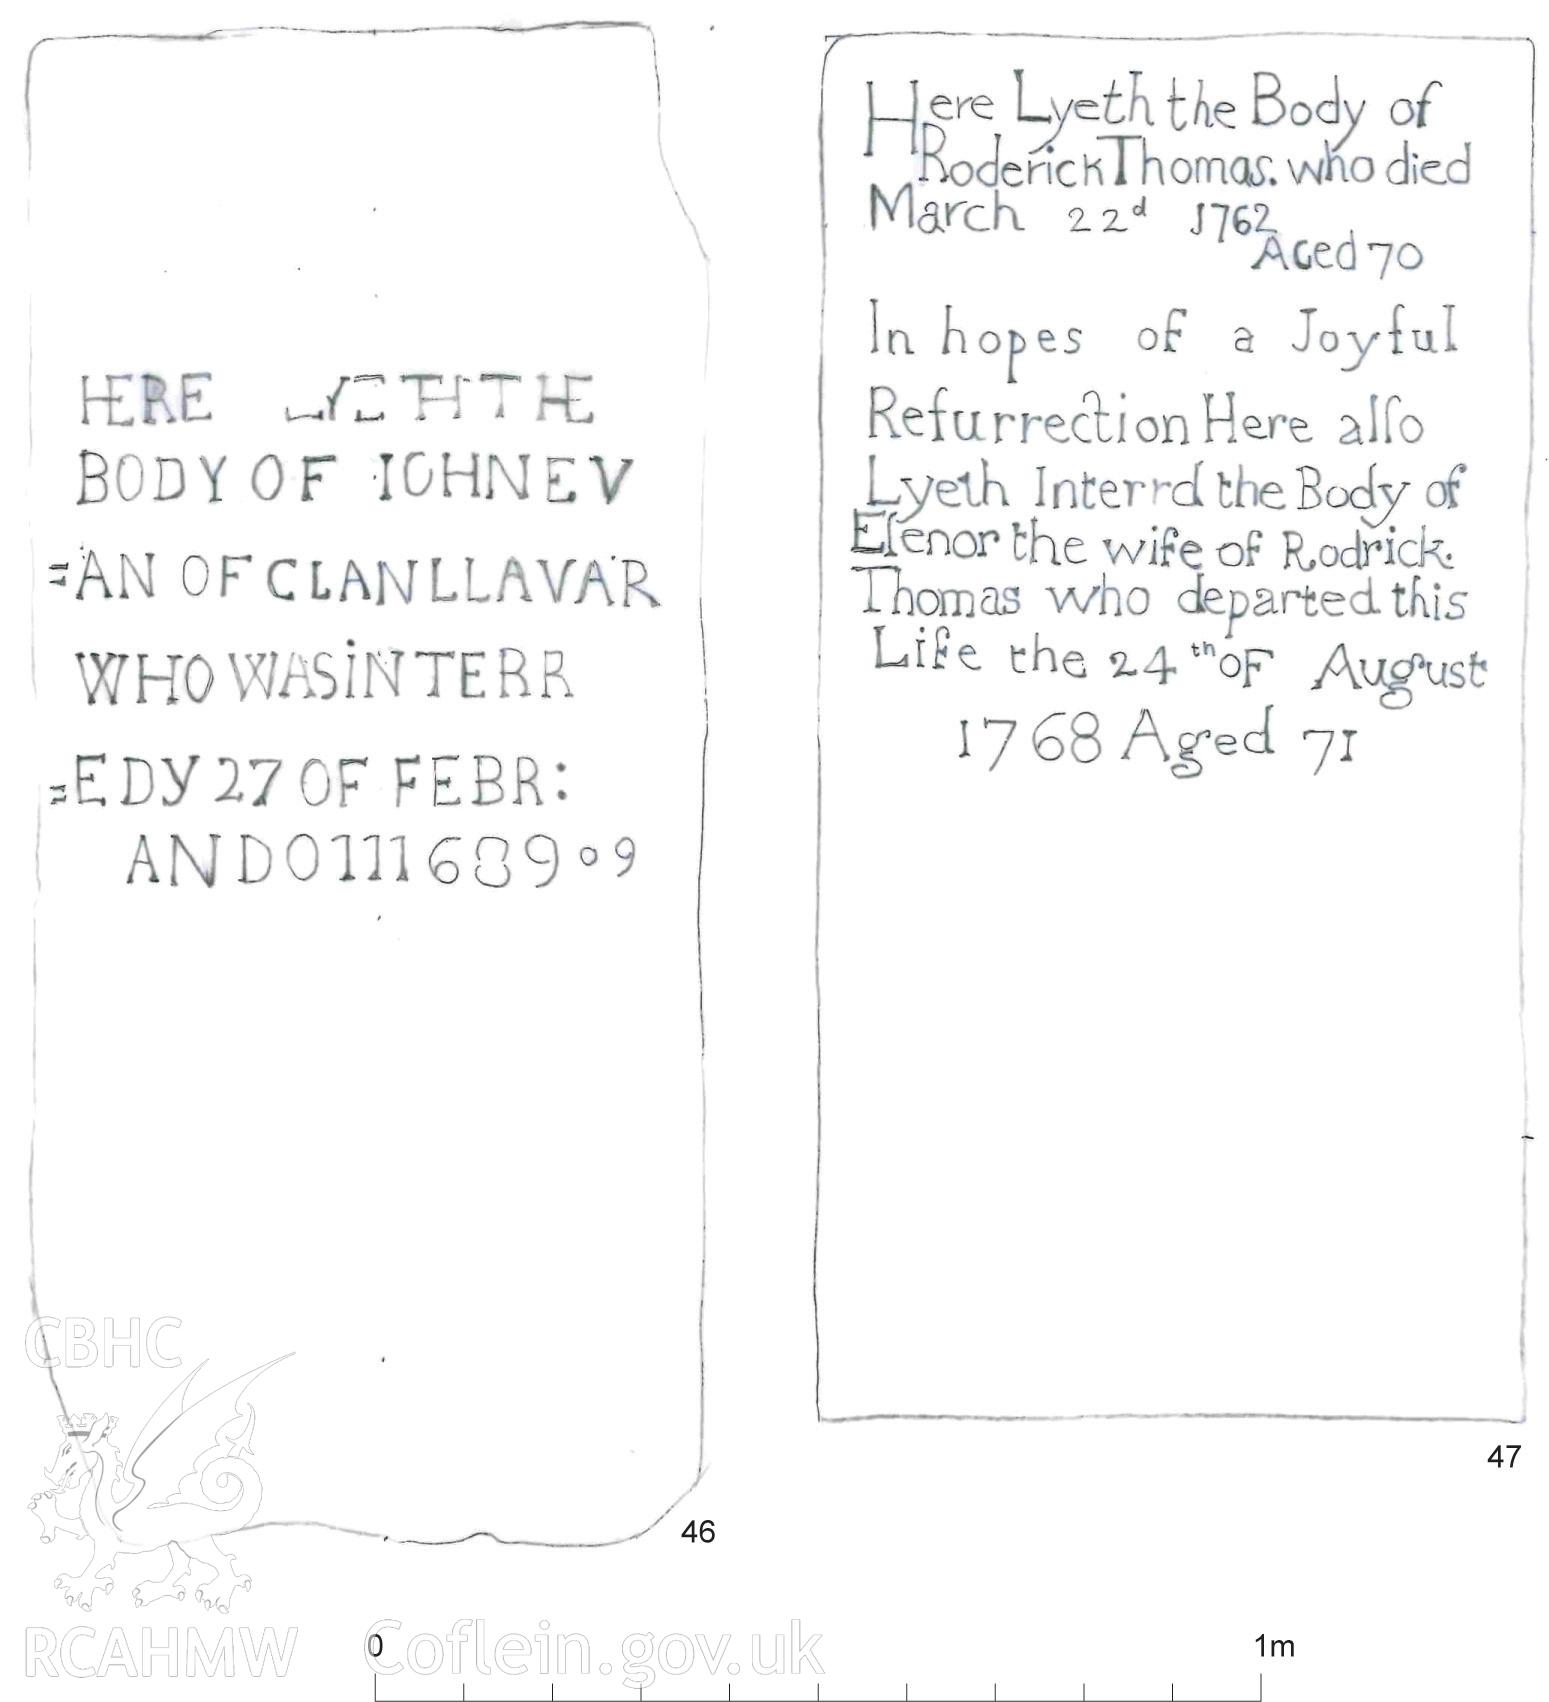 Drawing labelled 'grave slabs 46 and 47' relating to CPAT Project 1930: St Bueno's Church, Llanycil, Gwynedd - Archaeological Watching Brief. Prepared by Kate Pack of Clwyd Powys Archaeological Trust. Report no. 1267.